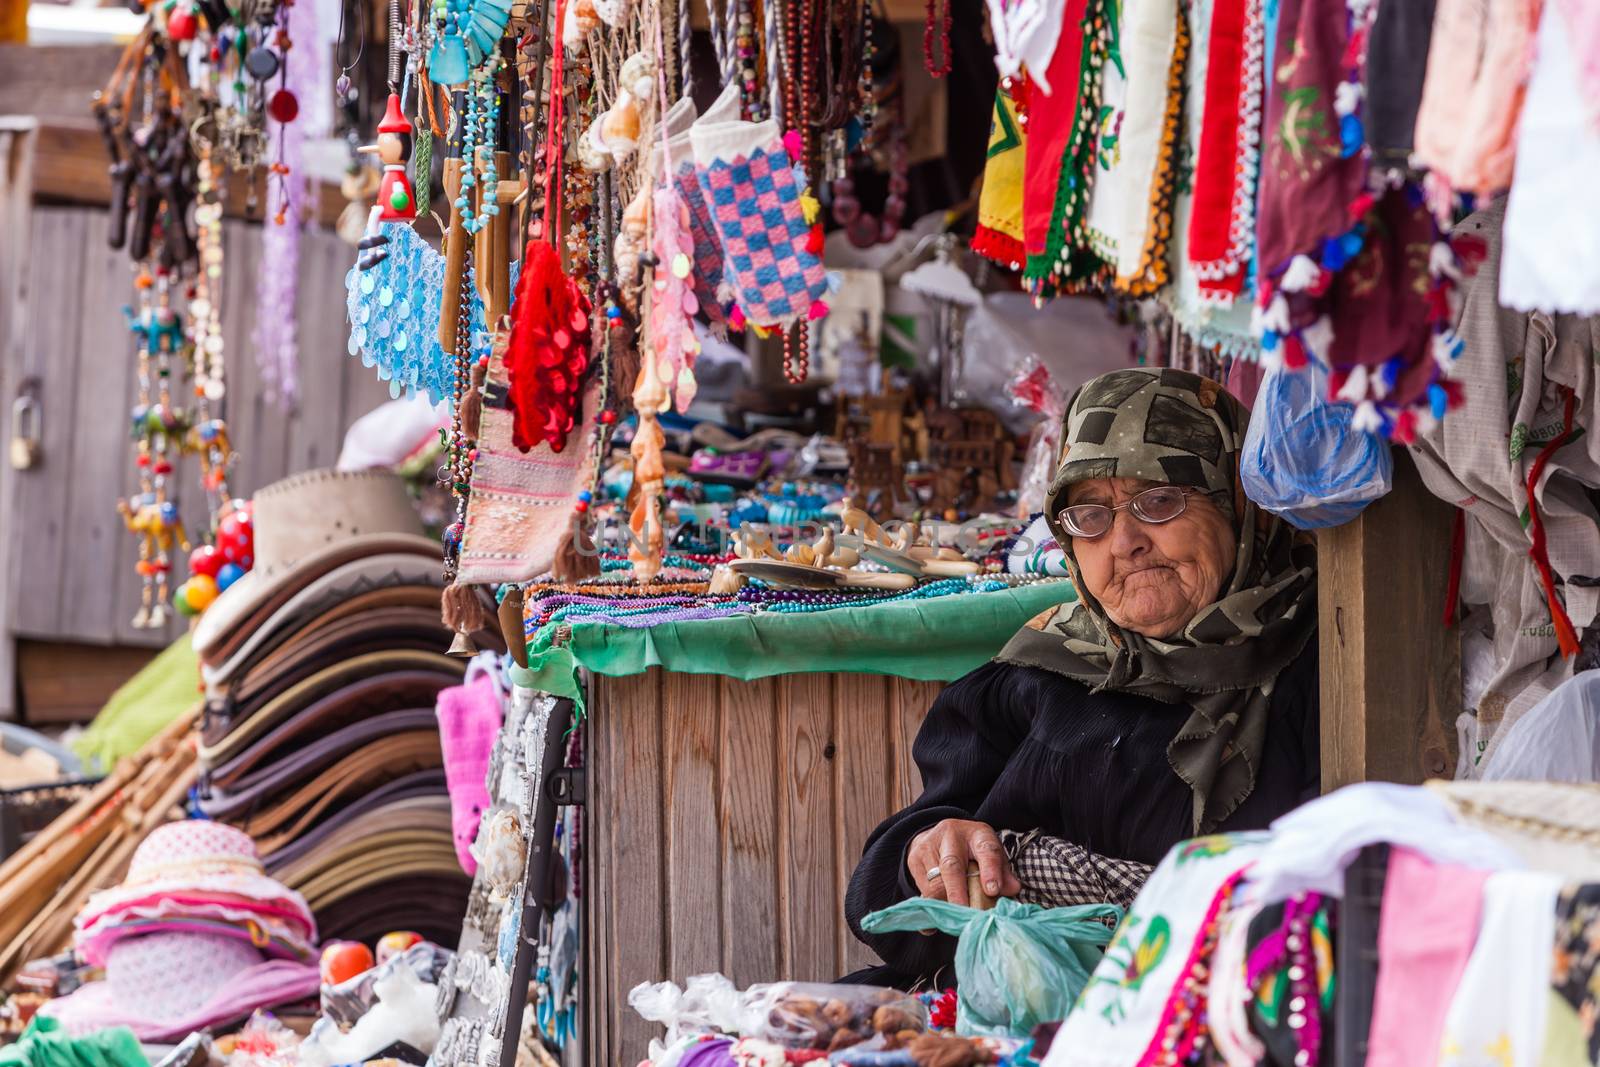 ASSOS, TURKEY – APRIL 23: Unidenified woman selling trinkets and souvenirs during buildup to Anzac Day on April 23, 2012 in Assos, Turkey. 